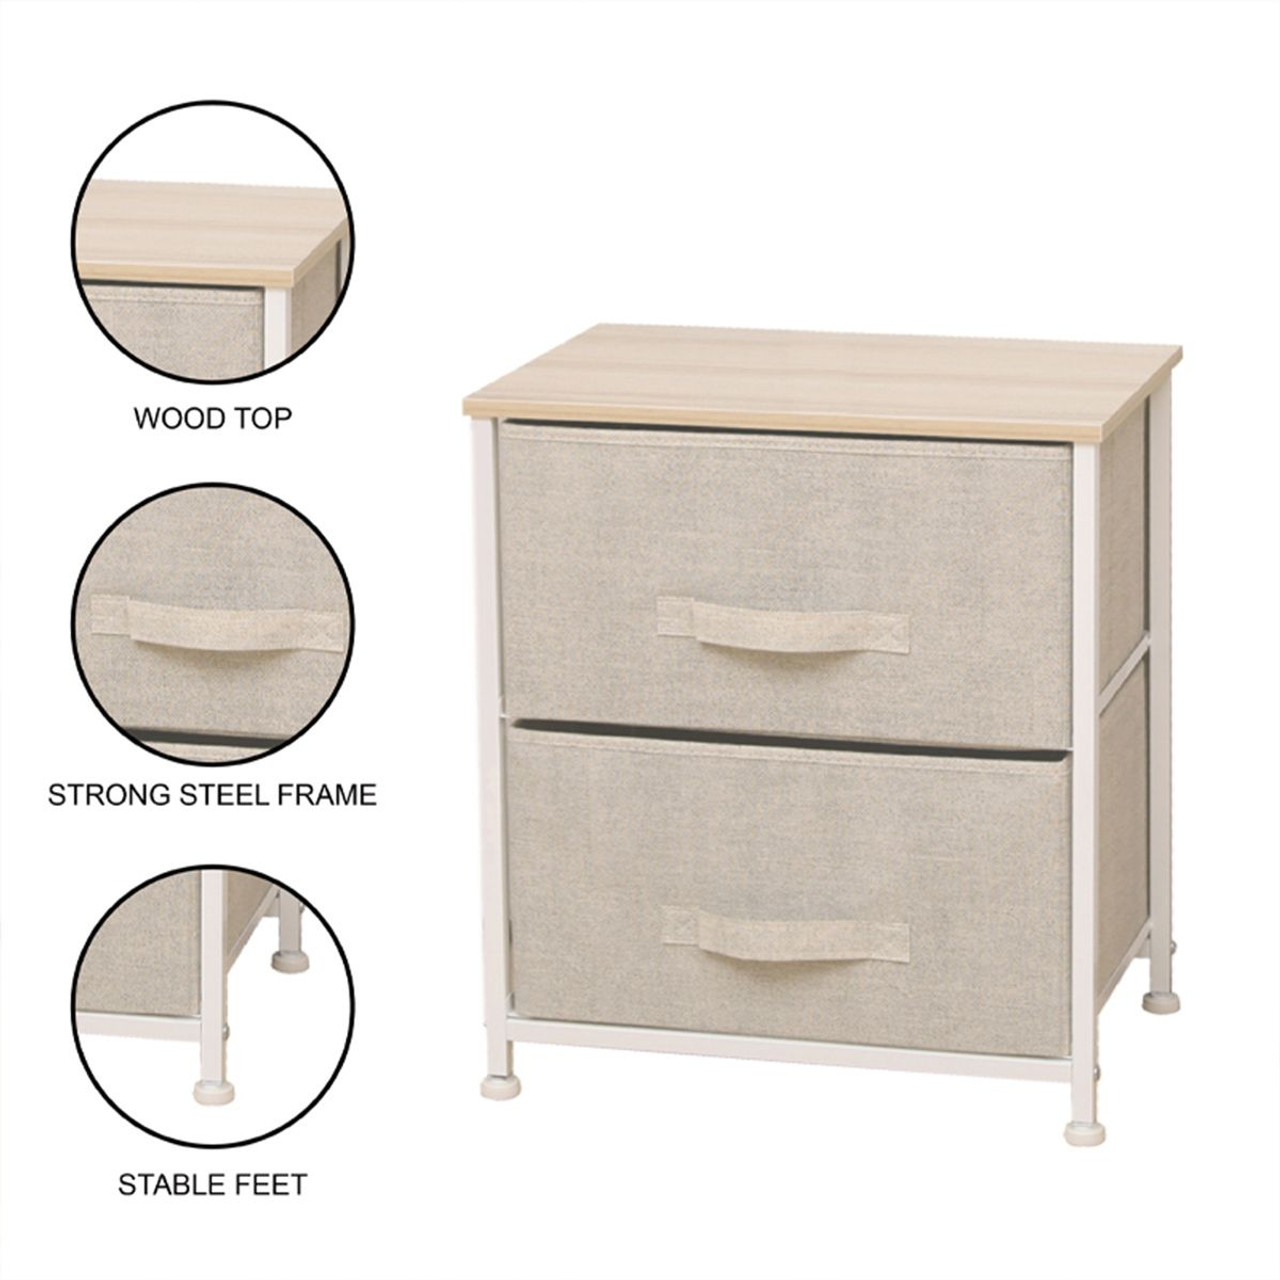 Foldable Storage Chest with Drawers product image